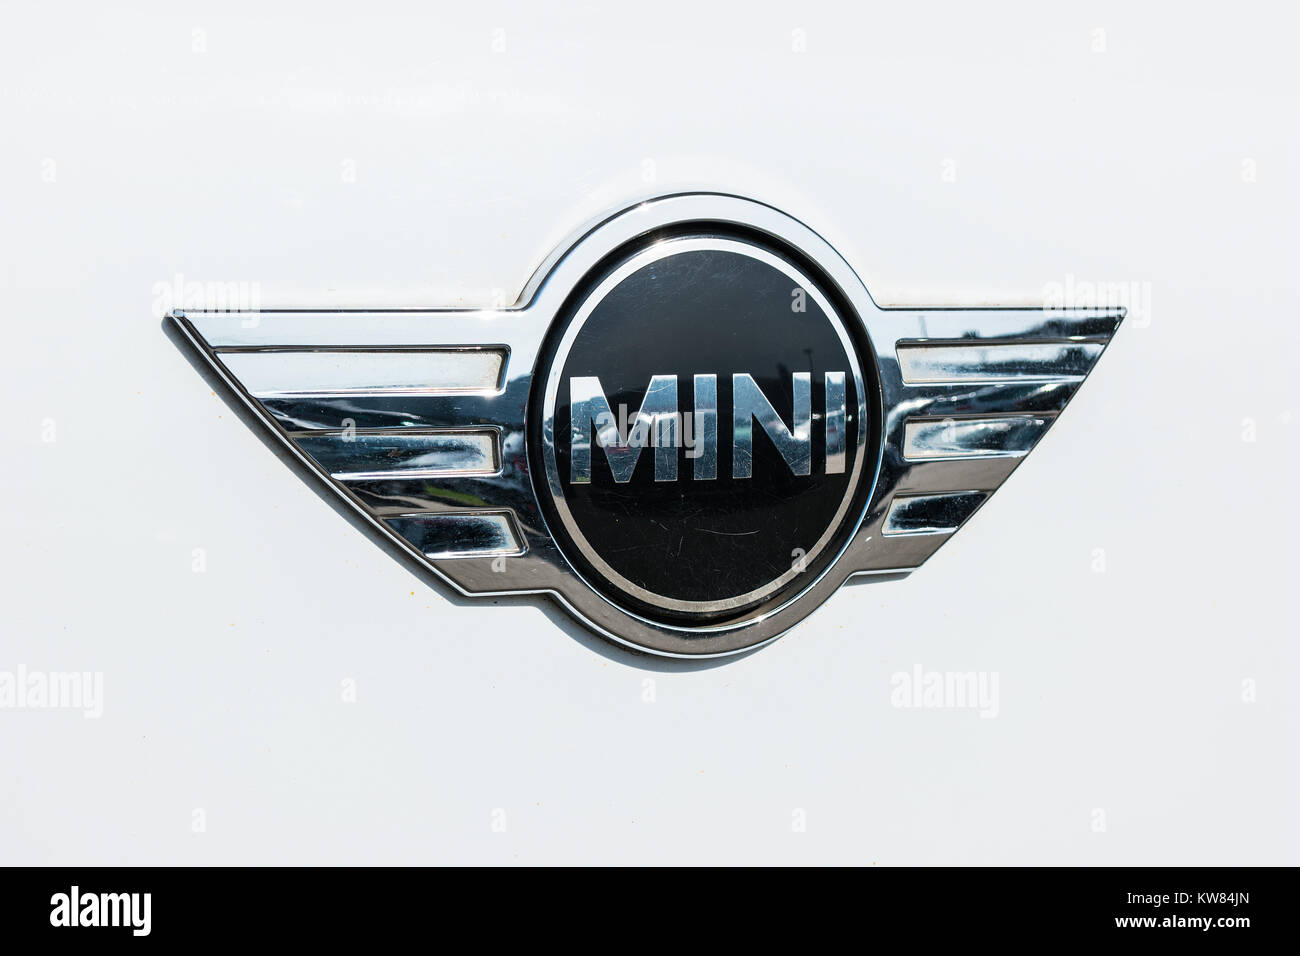 Mini cooper car logo on white car. It is a model produced by BMW since 2000. BMW is a German luxury vehicle, motorcycle, and engine manufacturing Stock Photo